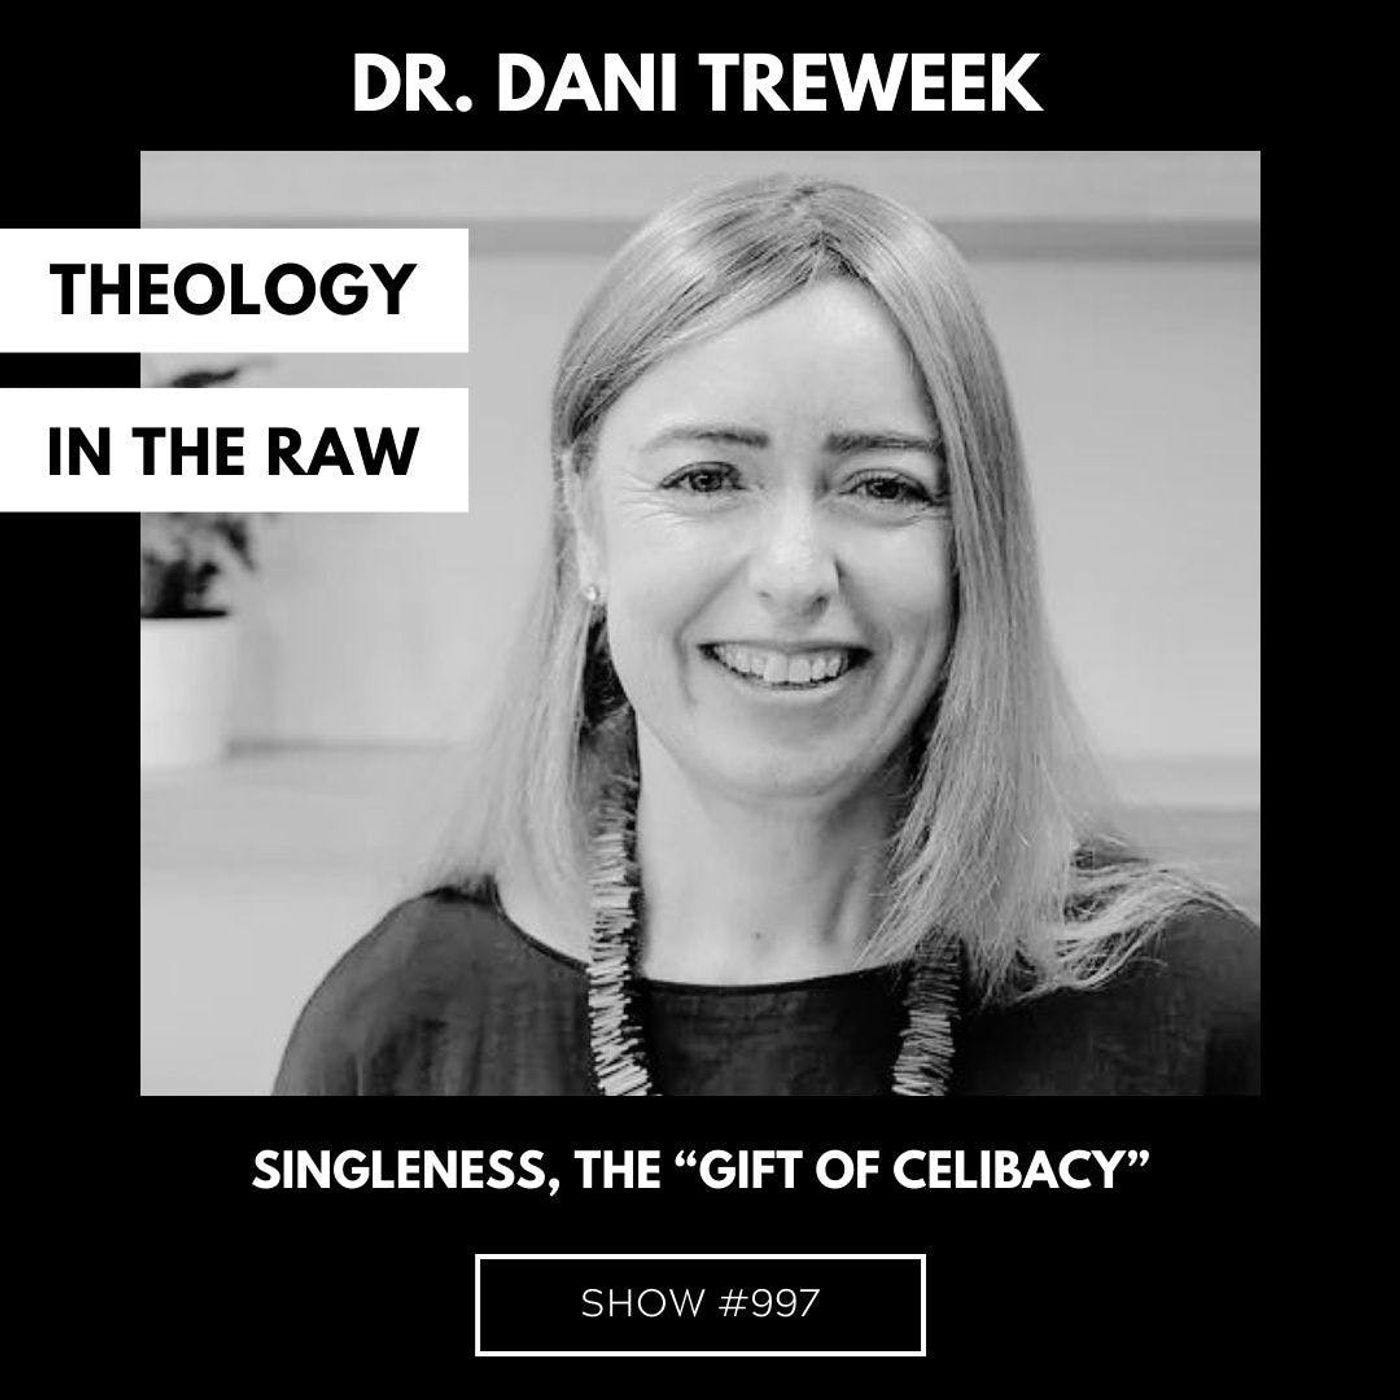 S9 Ep997: #997 - Singleness, the “Gift of Celibacy,” and Healthy Complementarianism: Dr. Dani Treweek